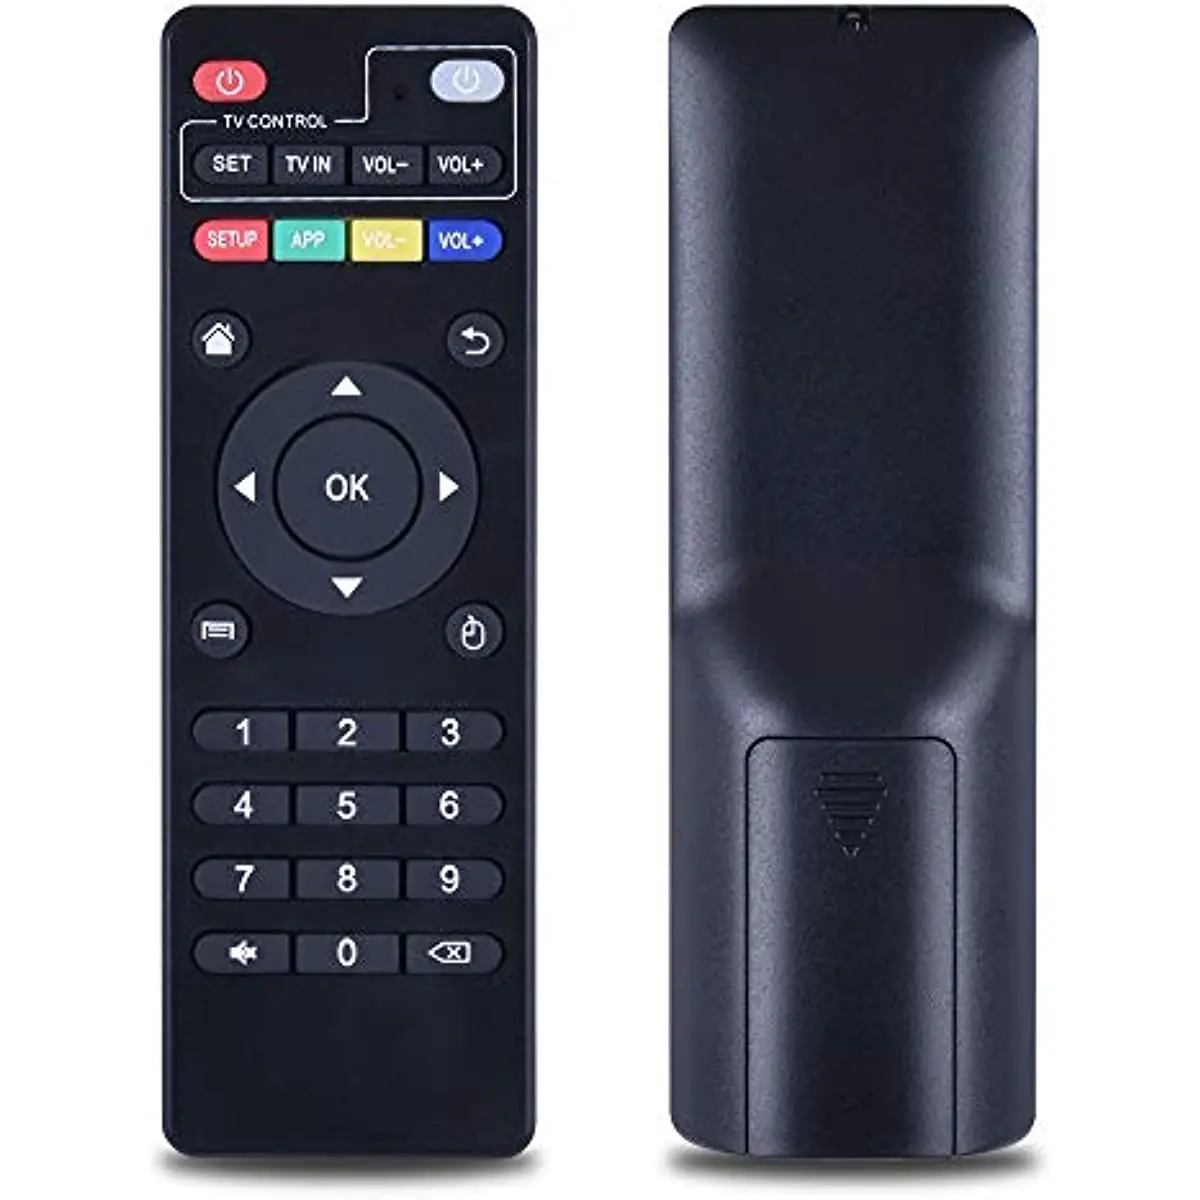 

New Smart Android TV Box Replacement Remote Control provided Suitable for H96 pro, V88, MXQ, Z28, T95X, T95Z Plus, TX3, X96 mini